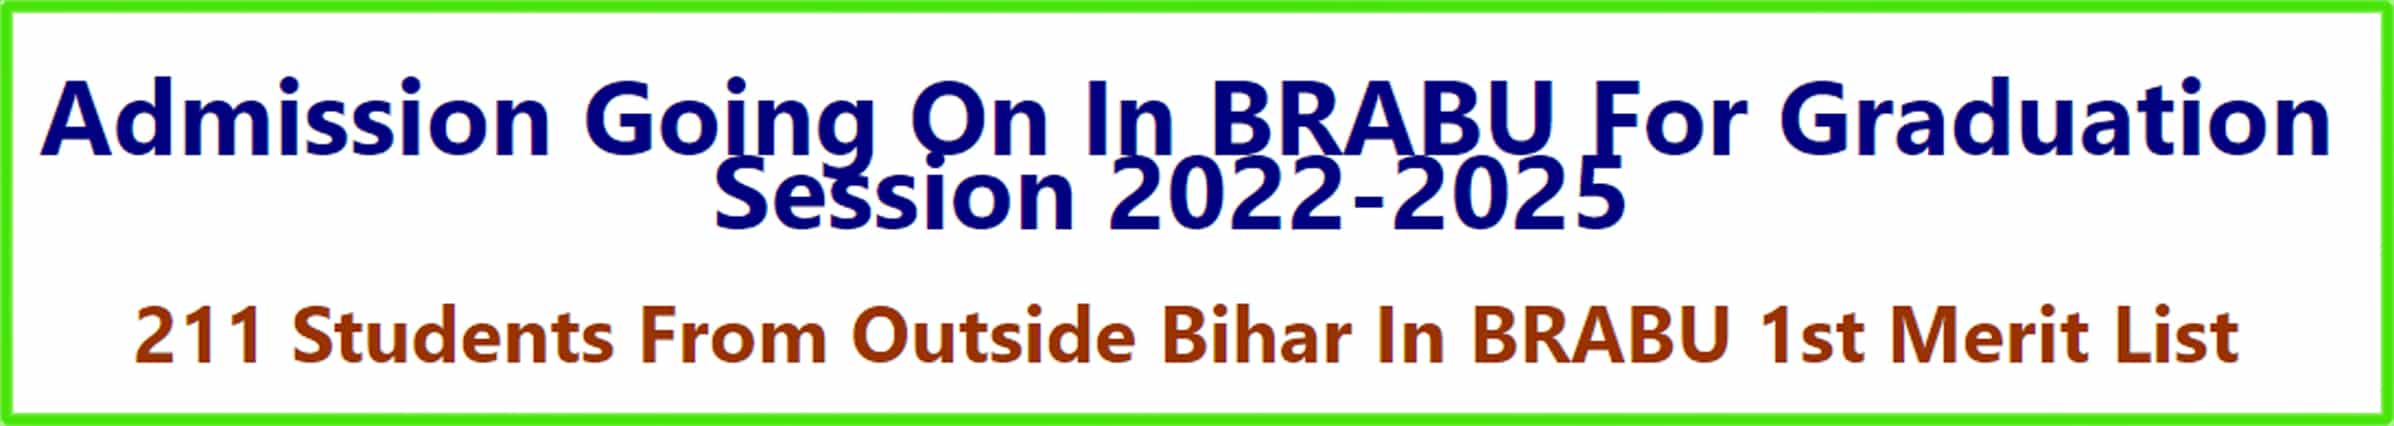 Admission Going On In BRABU For Graduation Session 2022-25 